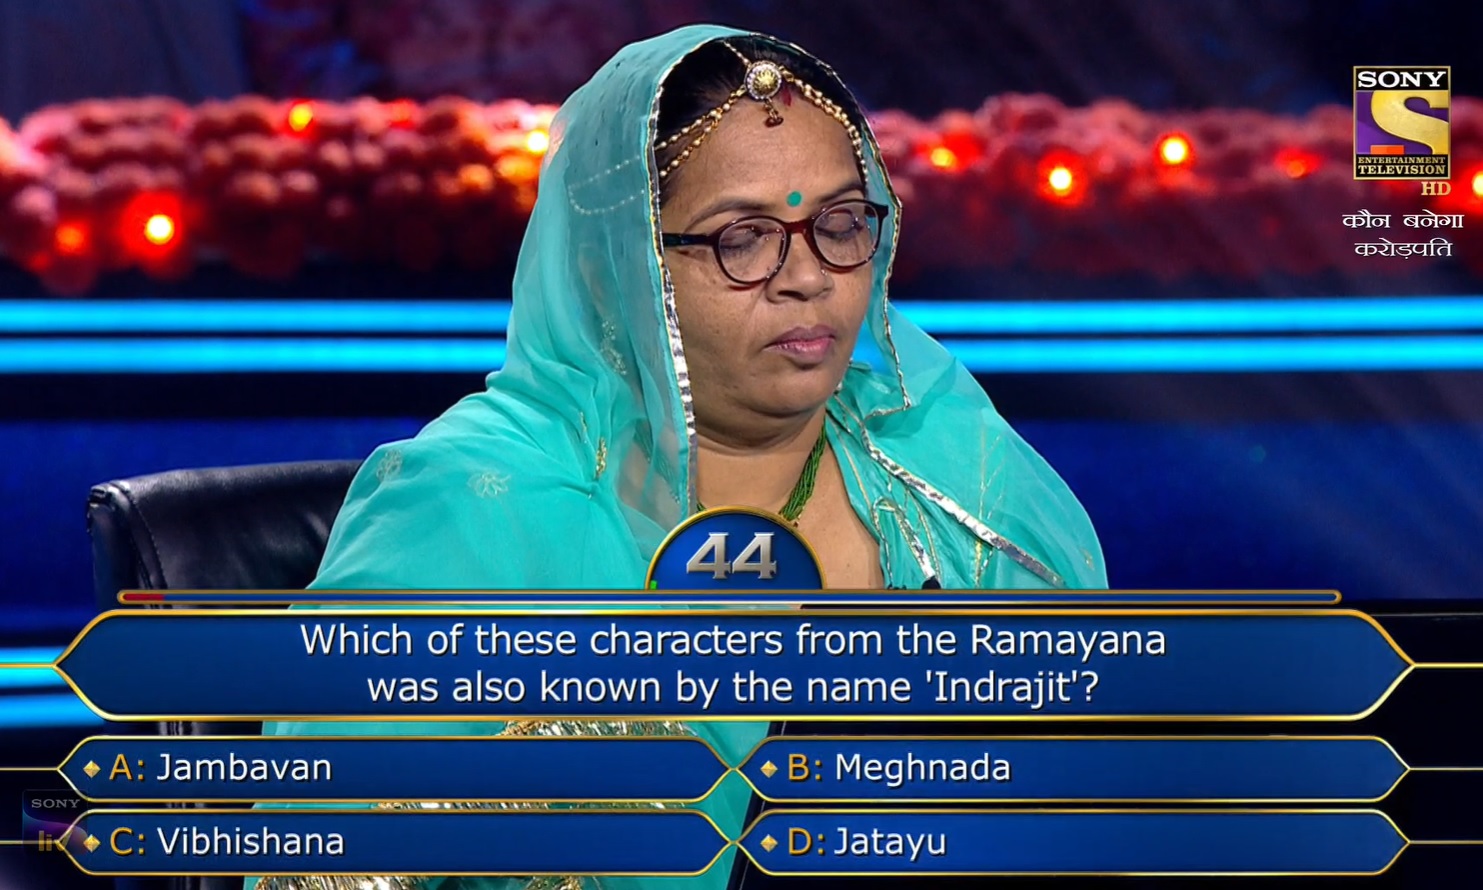 Ques : Which of these characters from the Ramayana was also known by the name ‘Indrajit’?